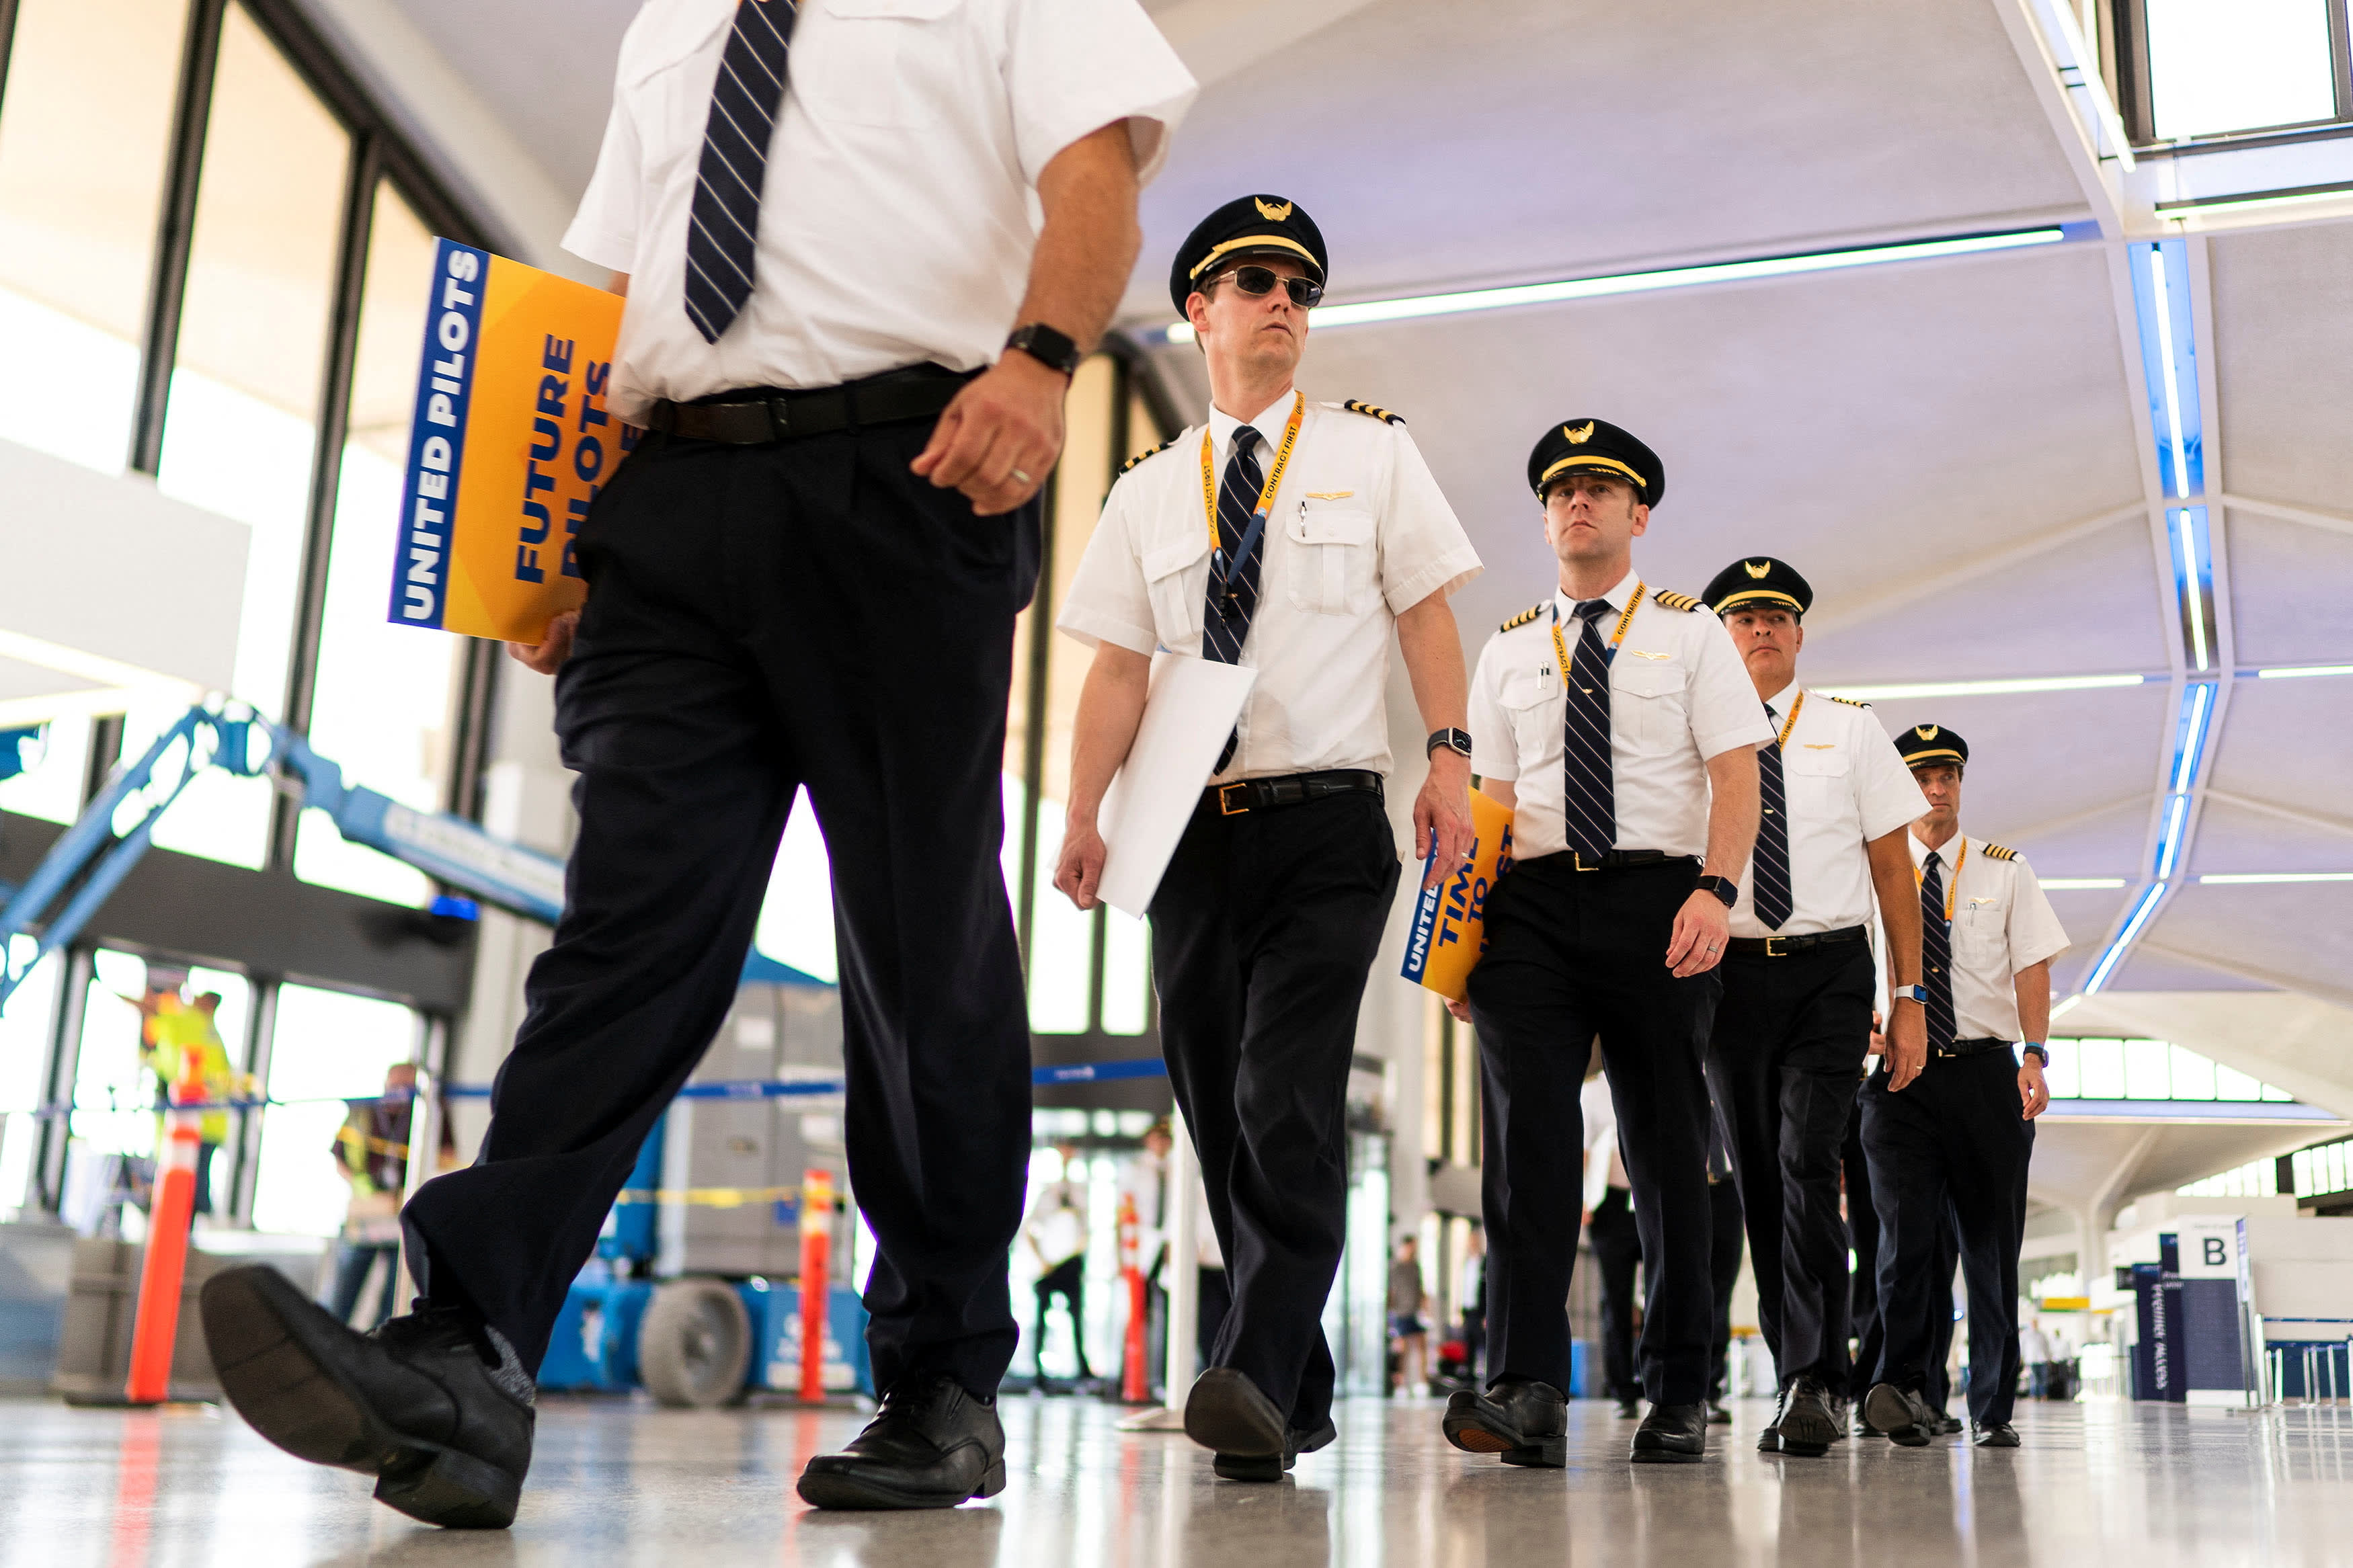 United reach initial 4-year working agreement with pilots, with increases of up to 40%